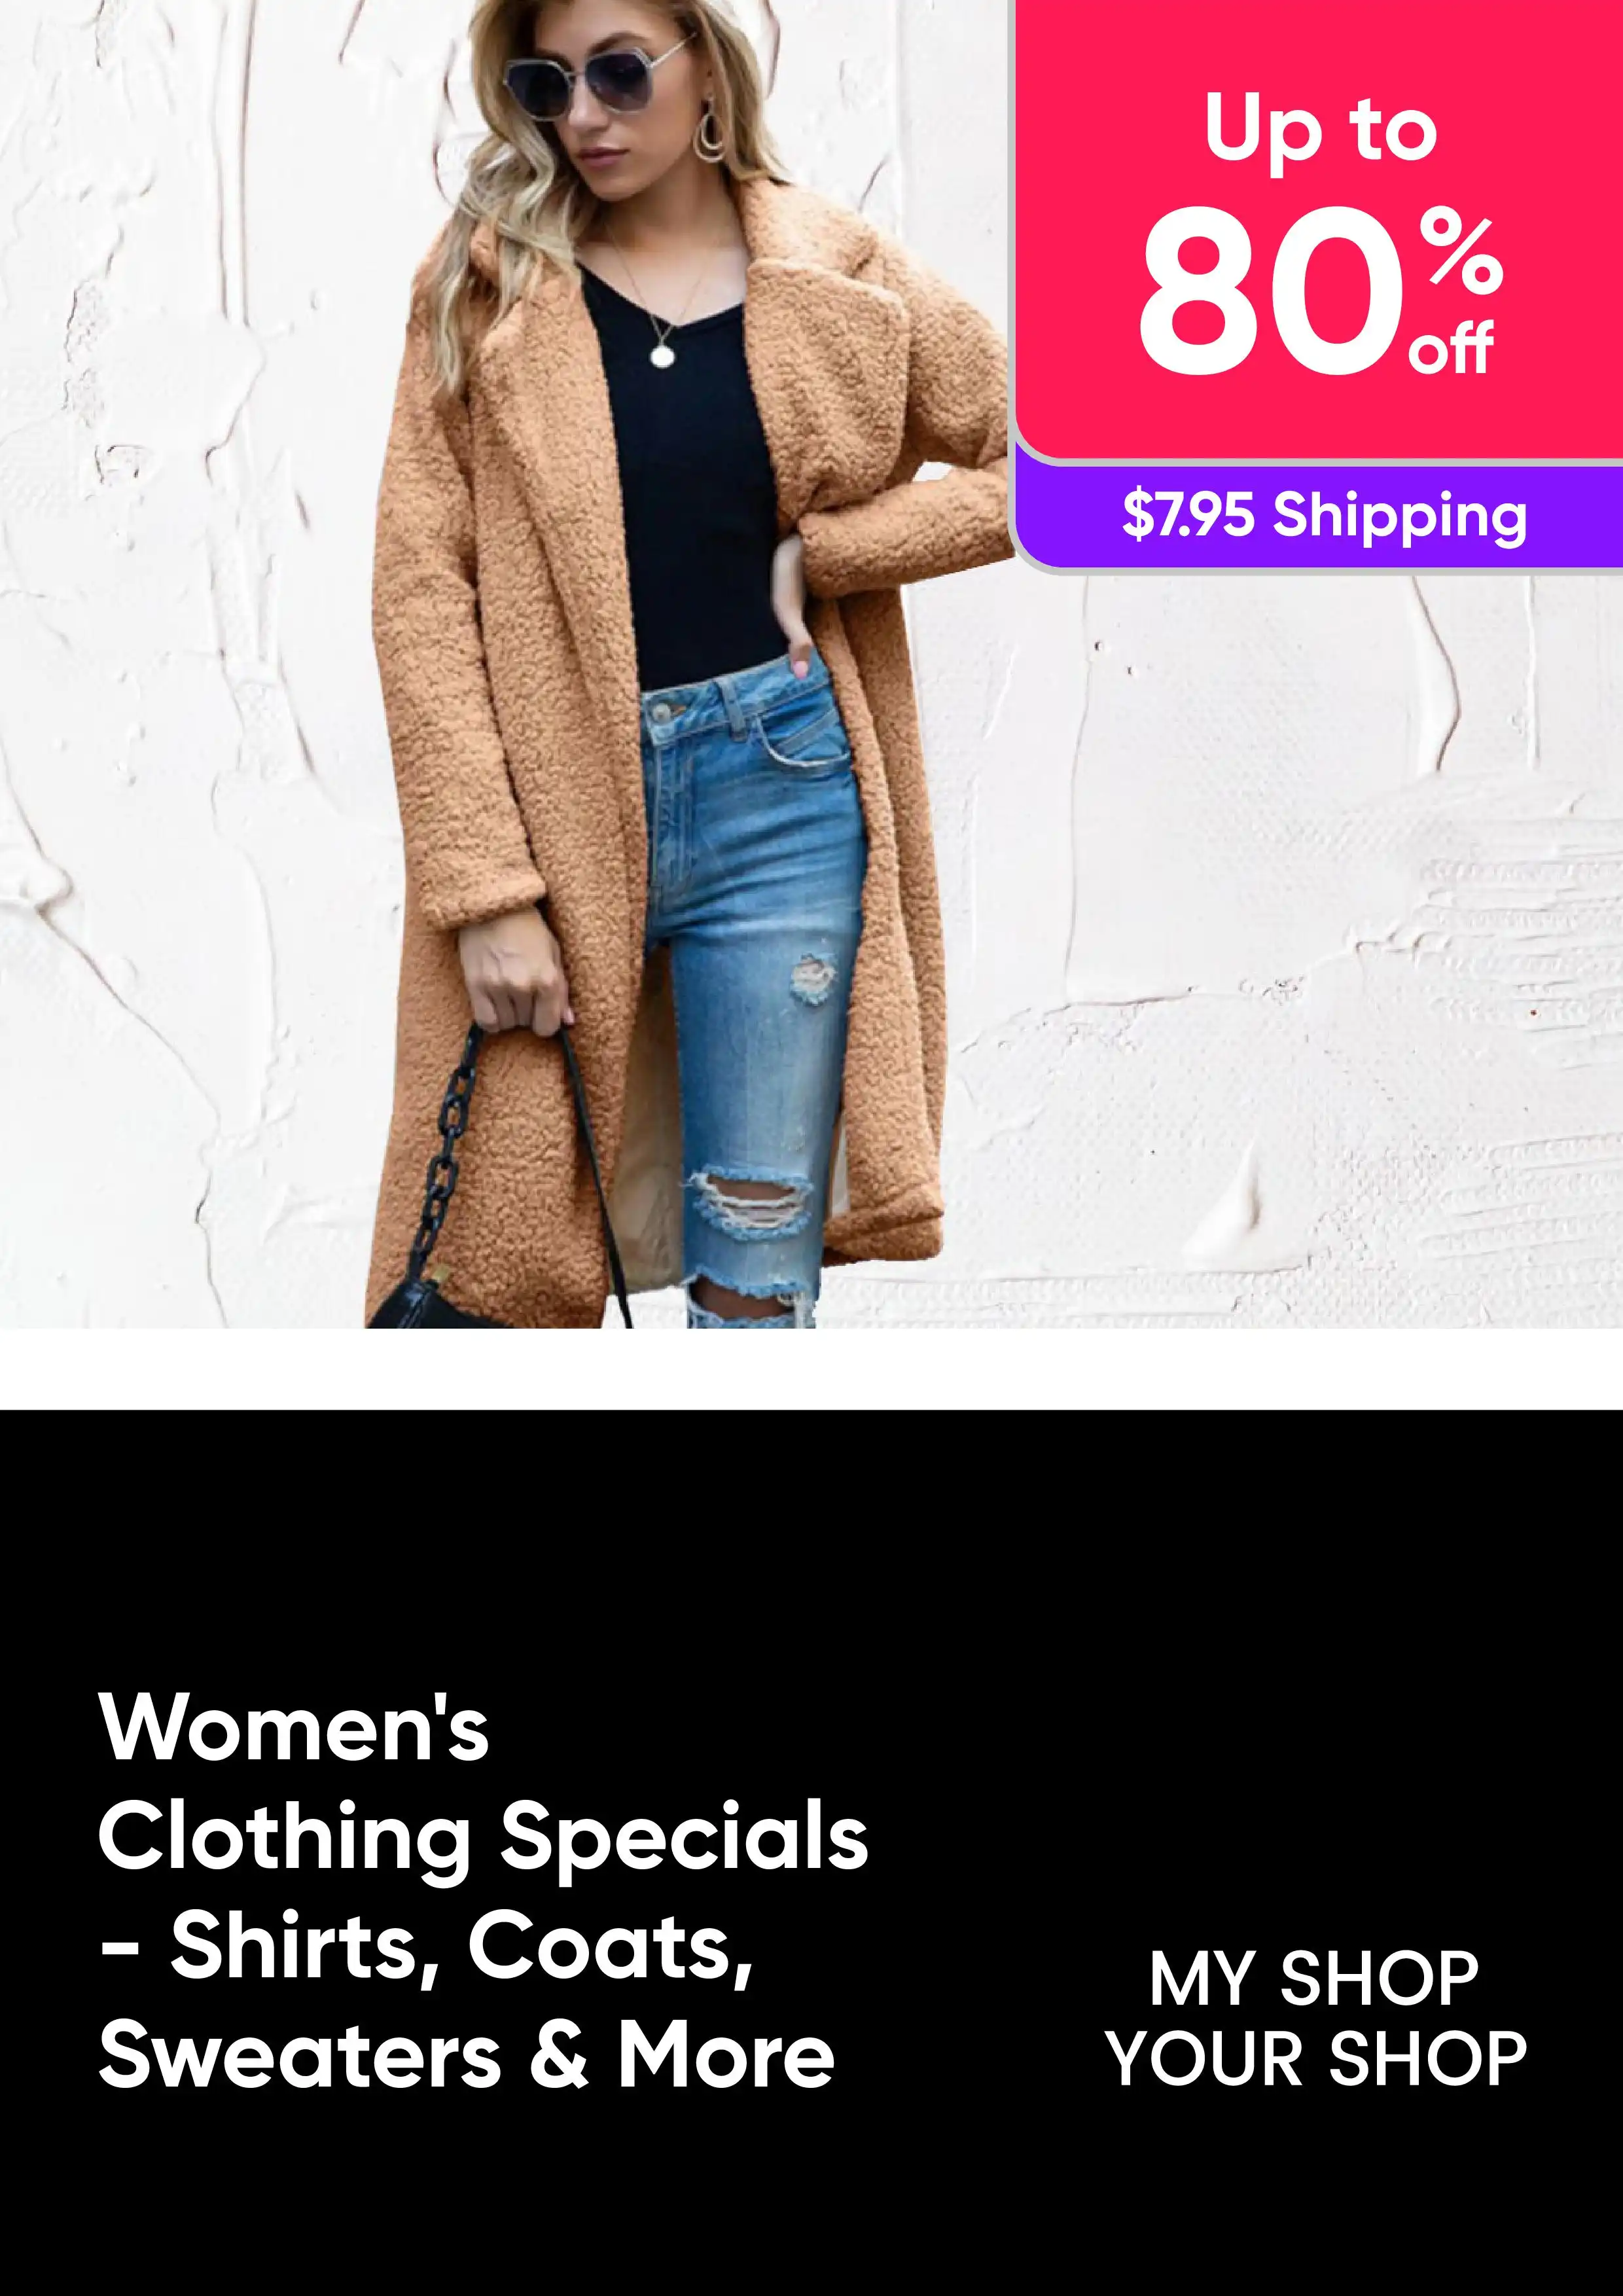 Women's Clothing Specials - Shop Shirts, Coats, Sweaters and More - Save up to 80% Off